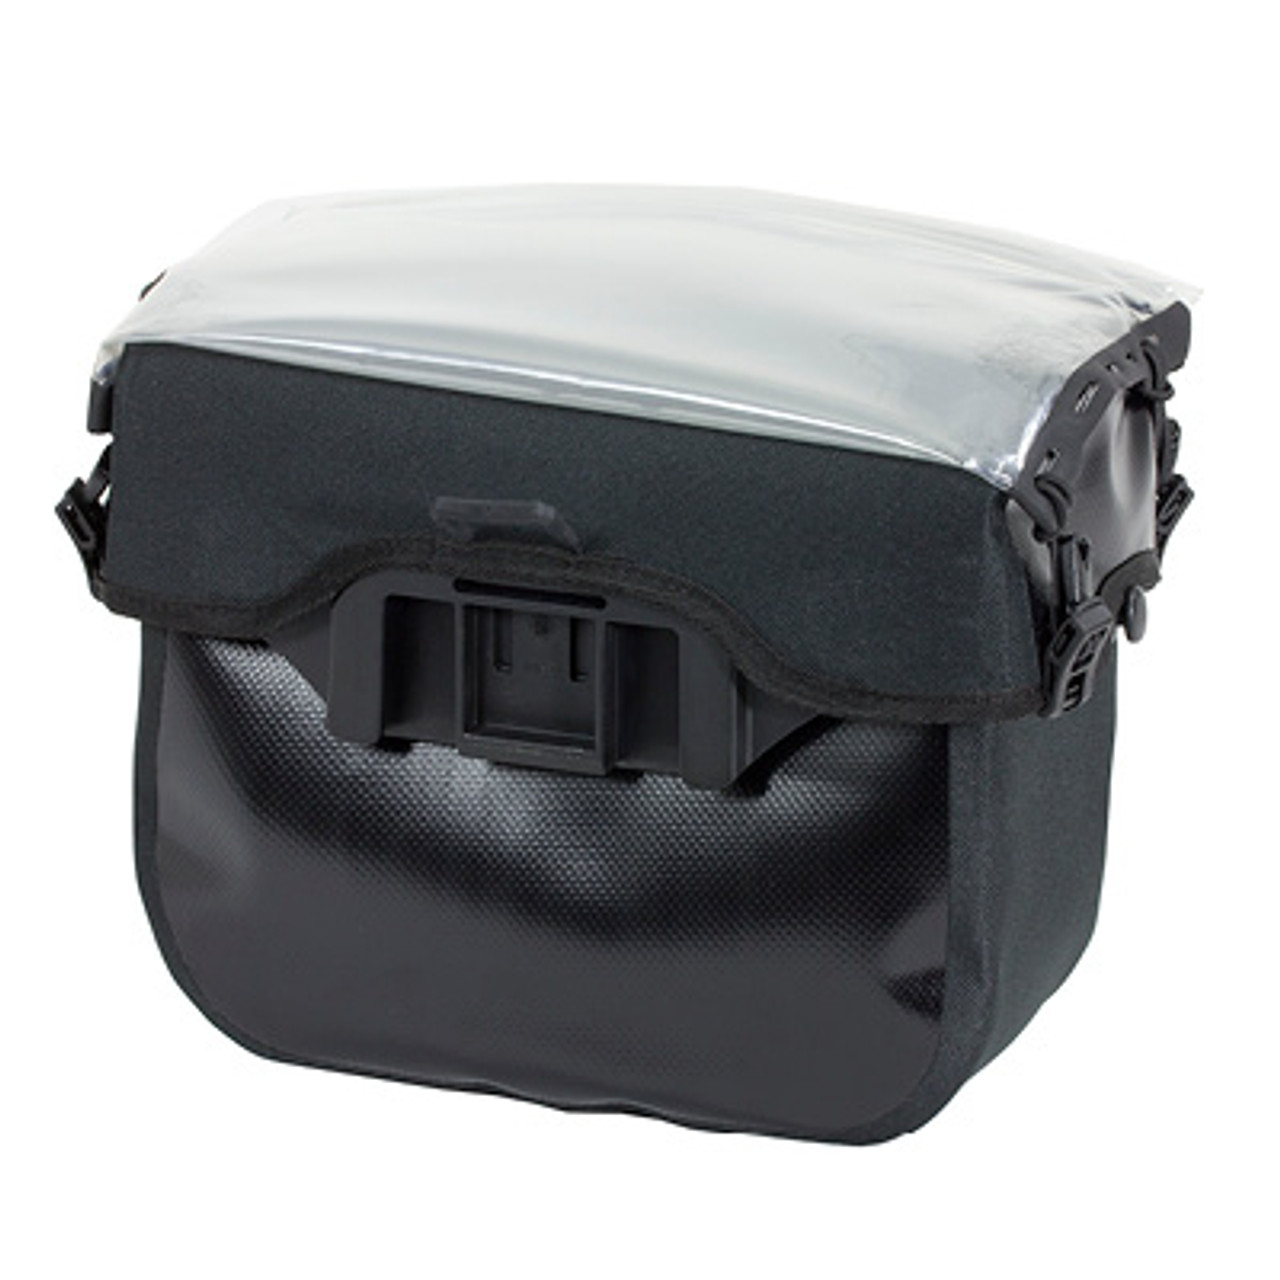 ortlieb ultimate map case